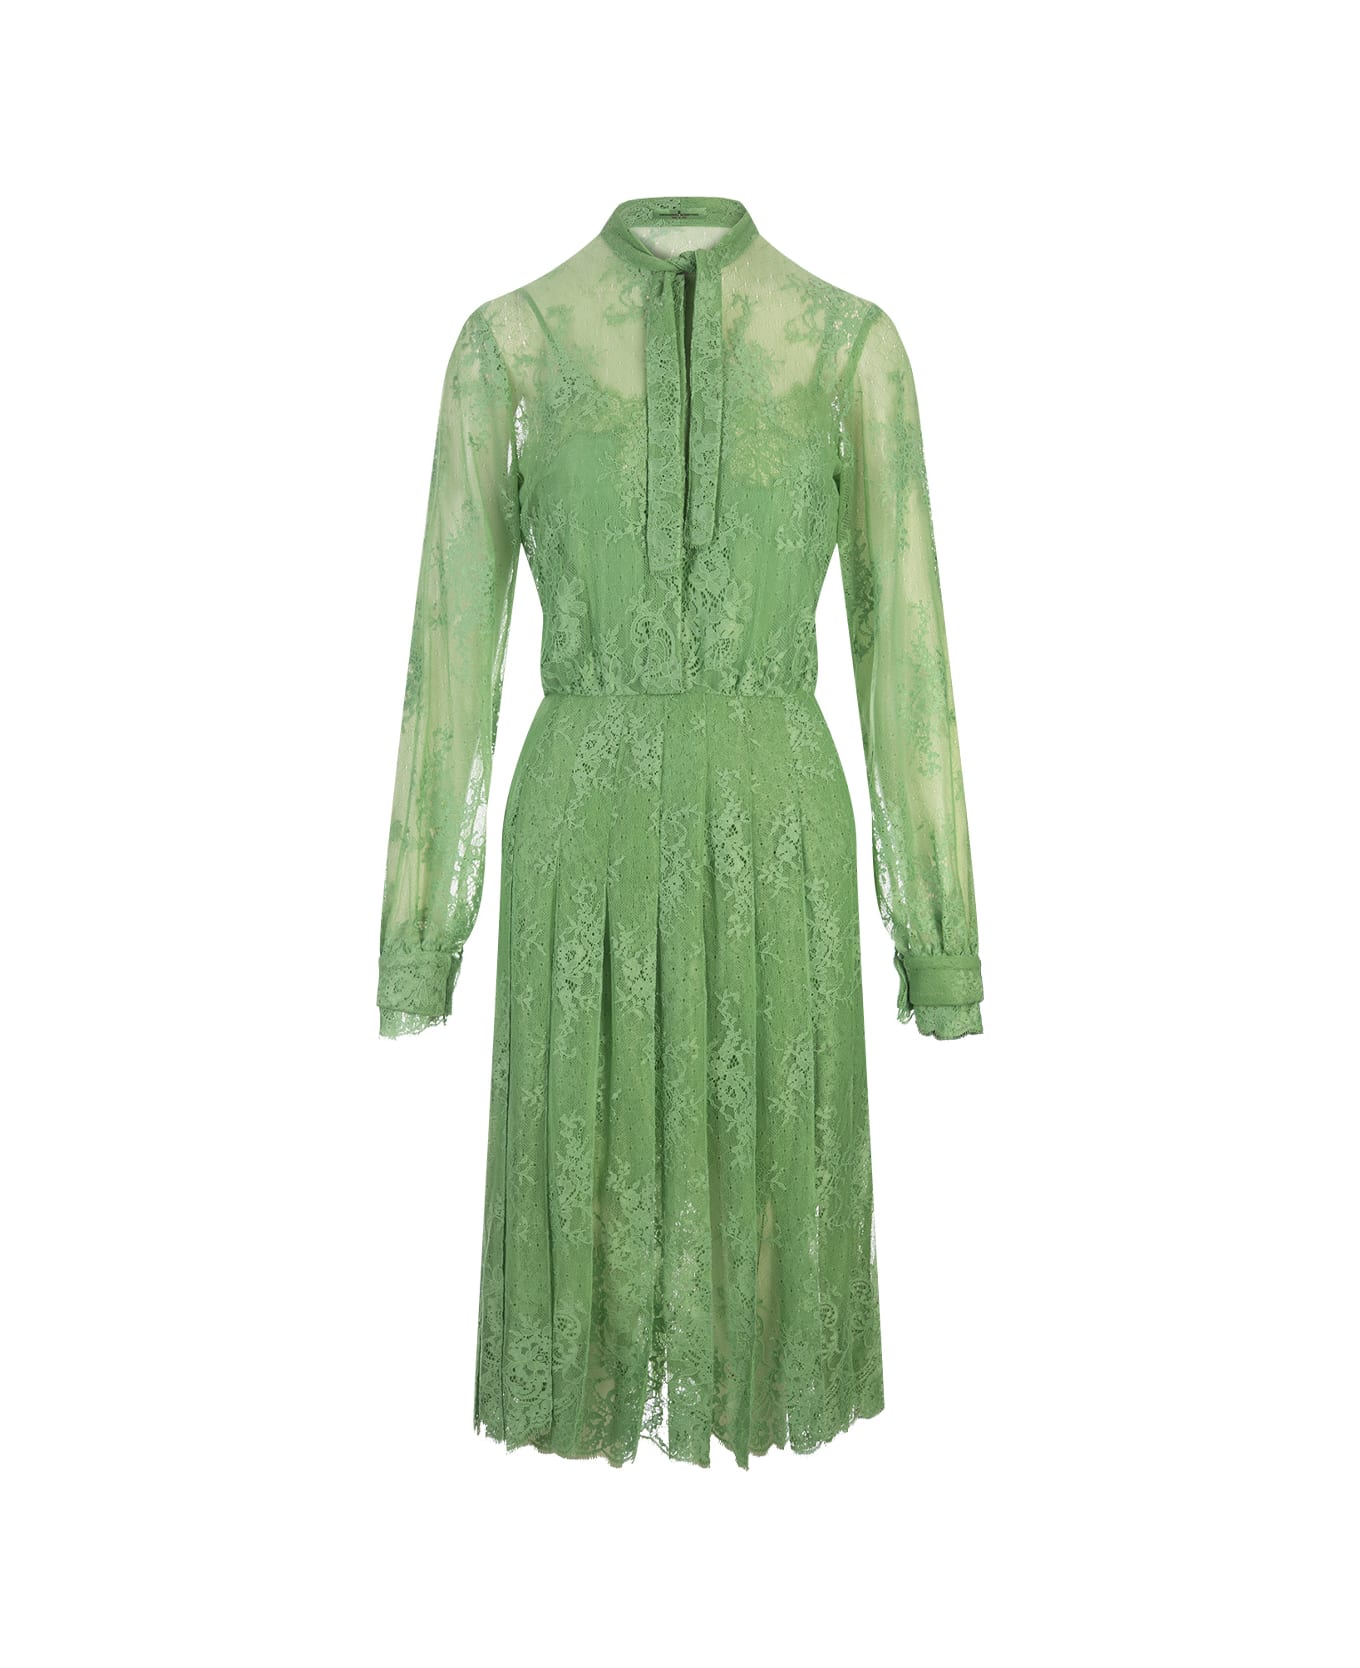 Ermanno Scervino Green Lace Dress With Long Sleeve And Collar Bow - Green